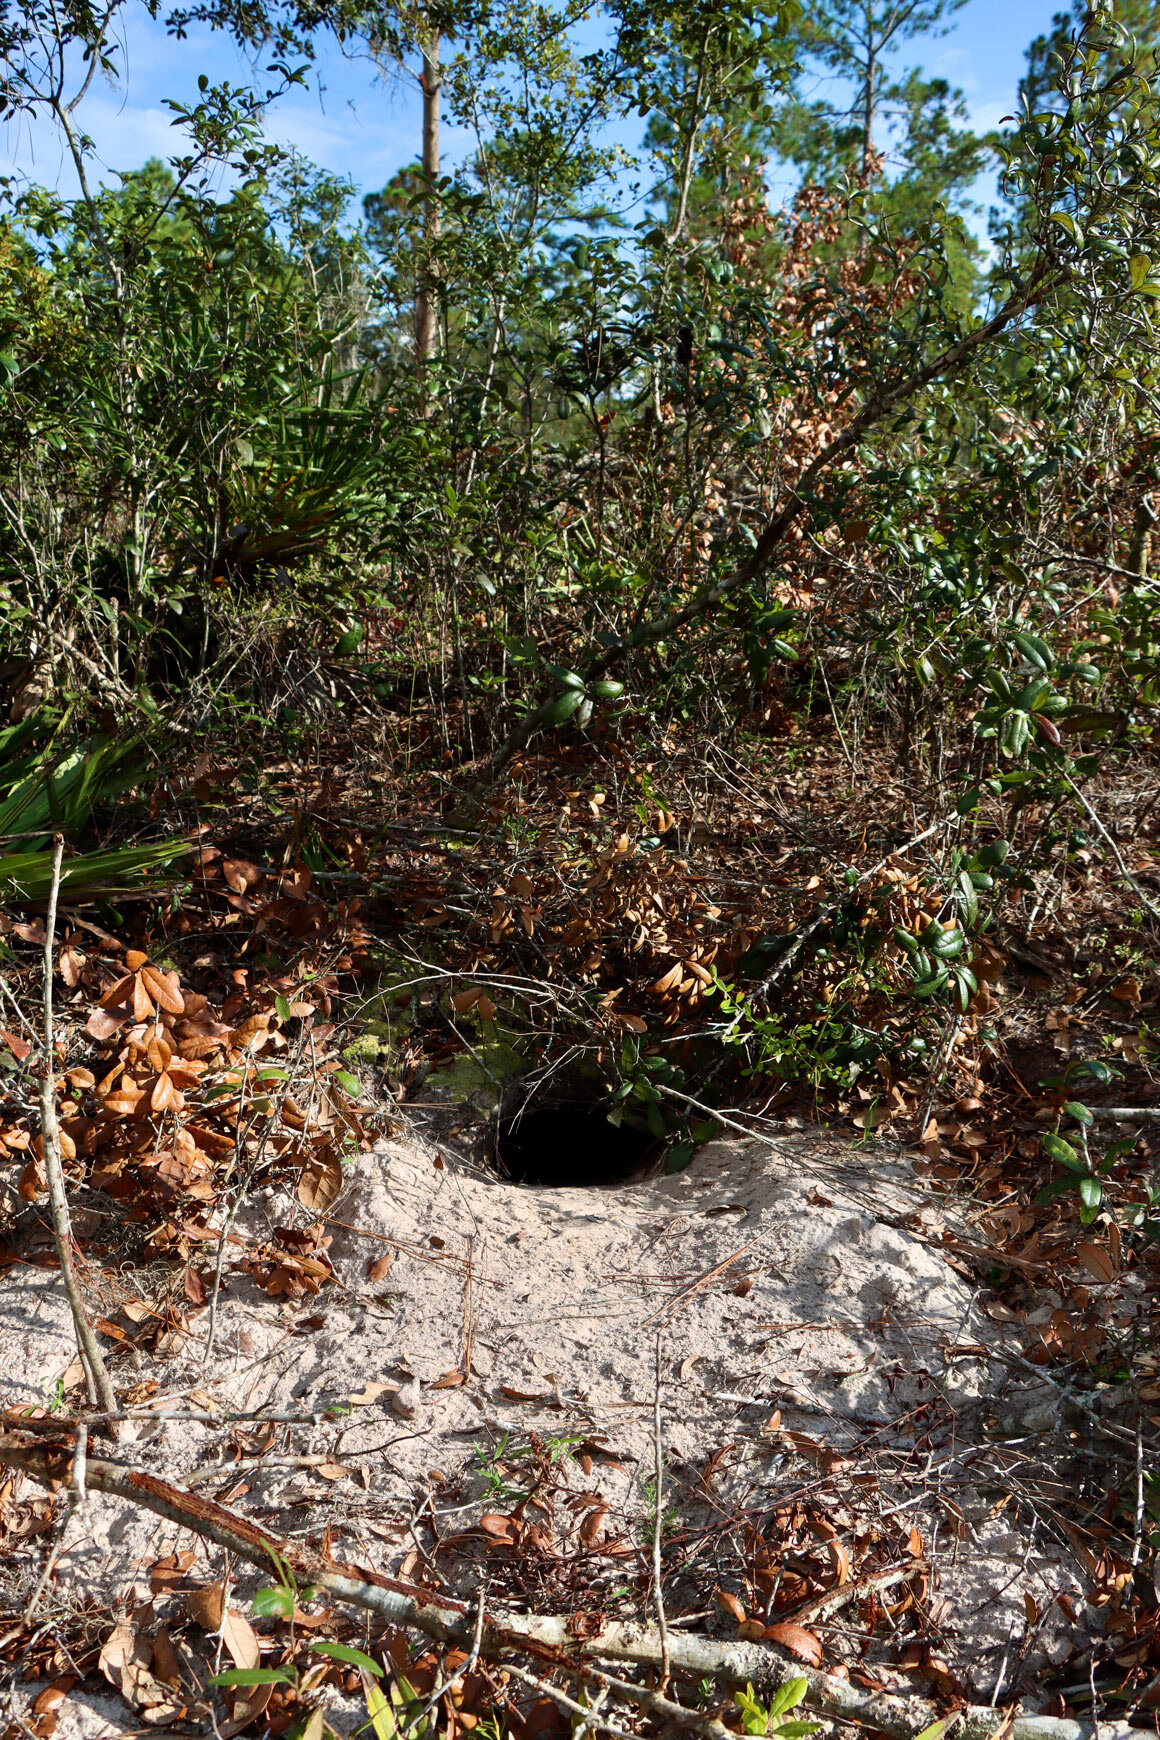  A gopher tortoise burrow in the scrub habitat with evidence of mowing around it 